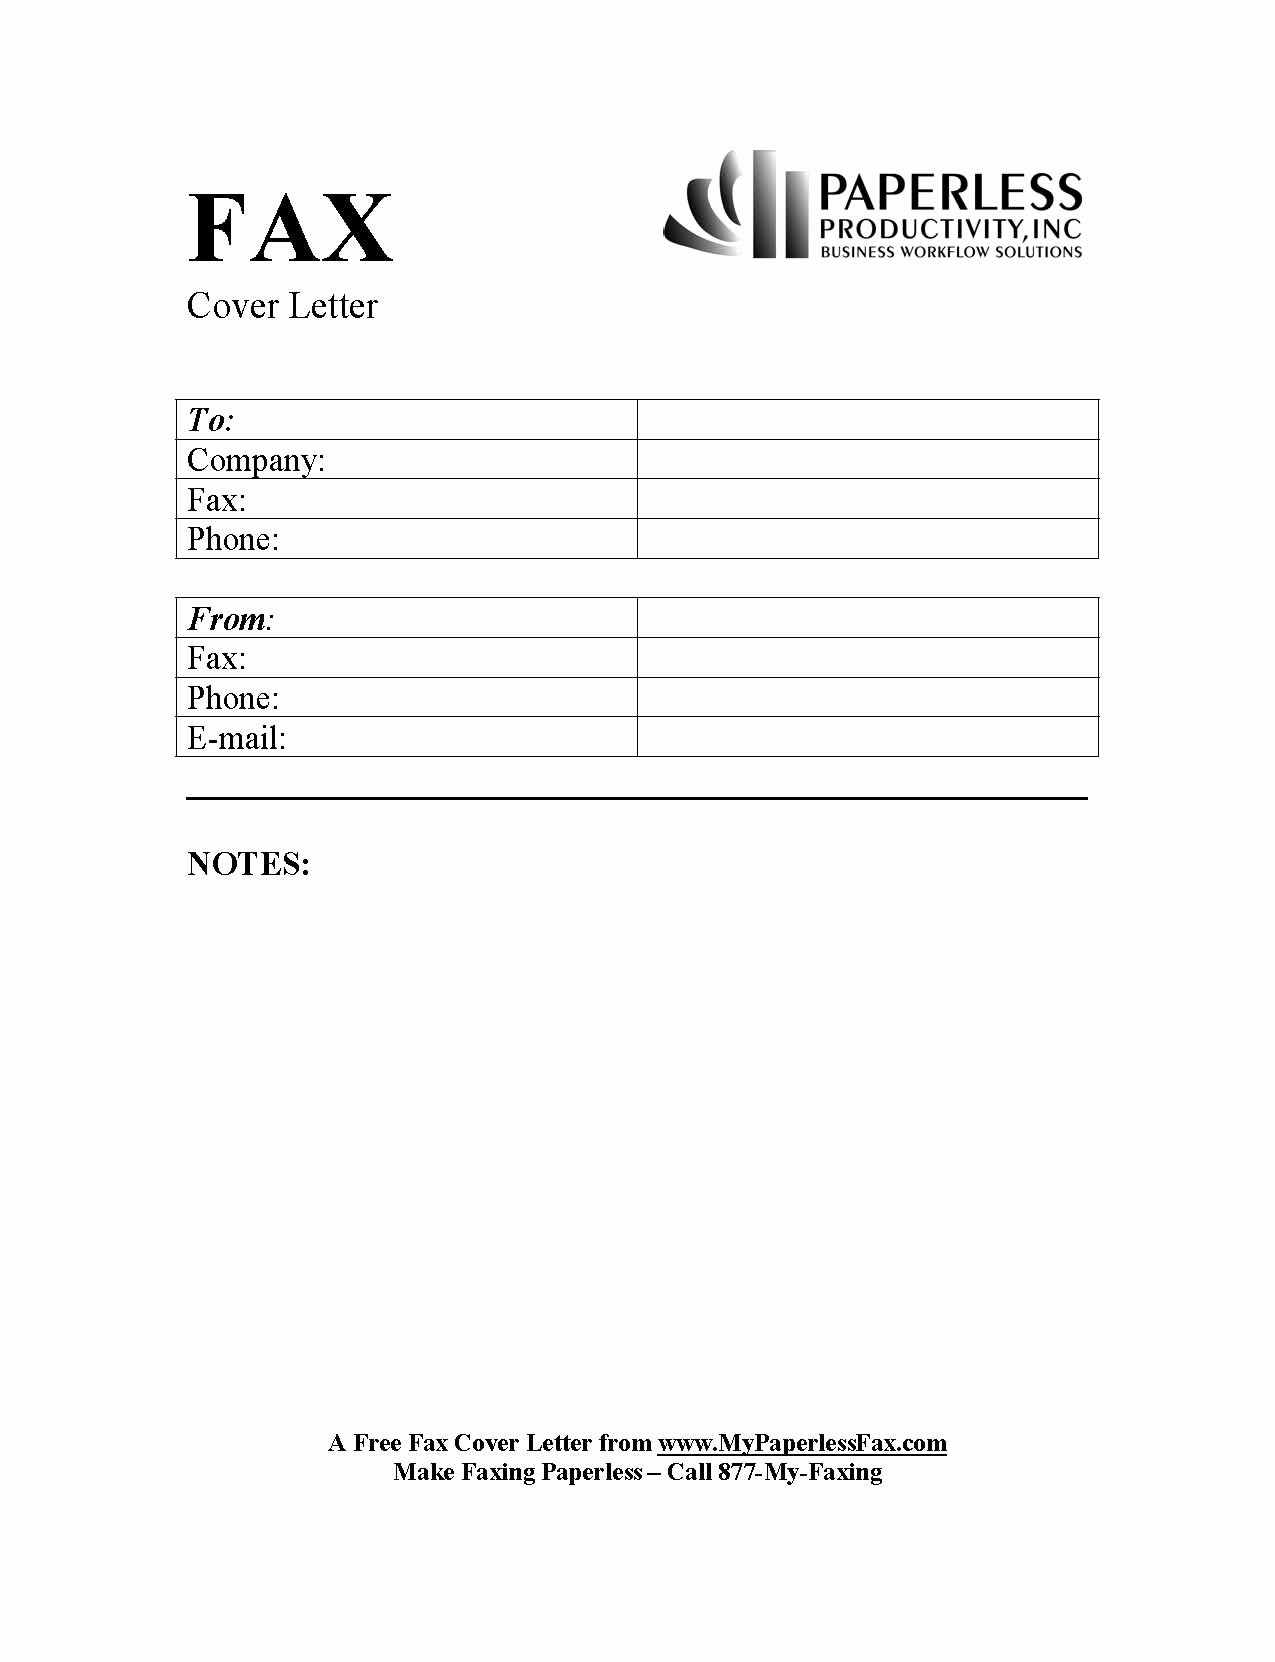 Sample Of Fax Cover Sheet Awesome Blank Fax Cover Letter 2016 Samplebusinessresume